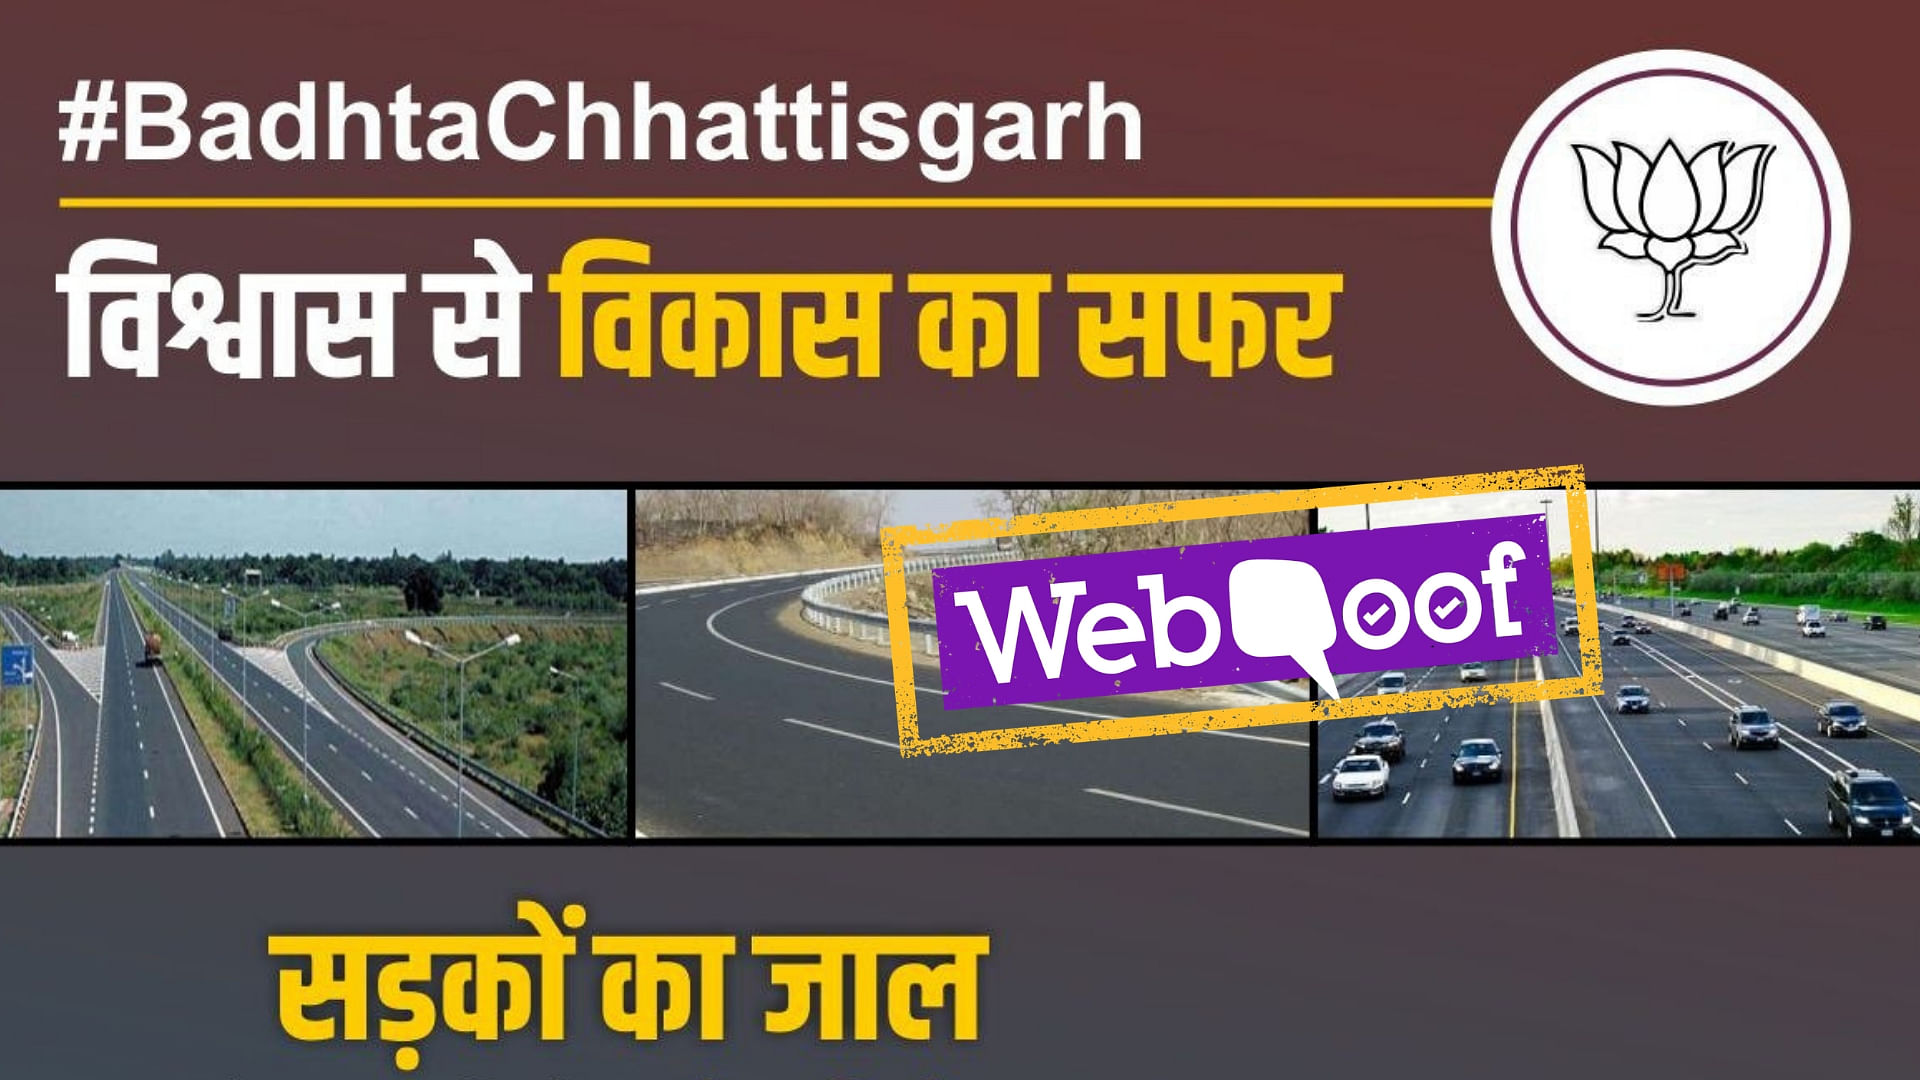 (Photo Courtesy:Twitter/BJP Chhattisgarh/Altered by The Quint)